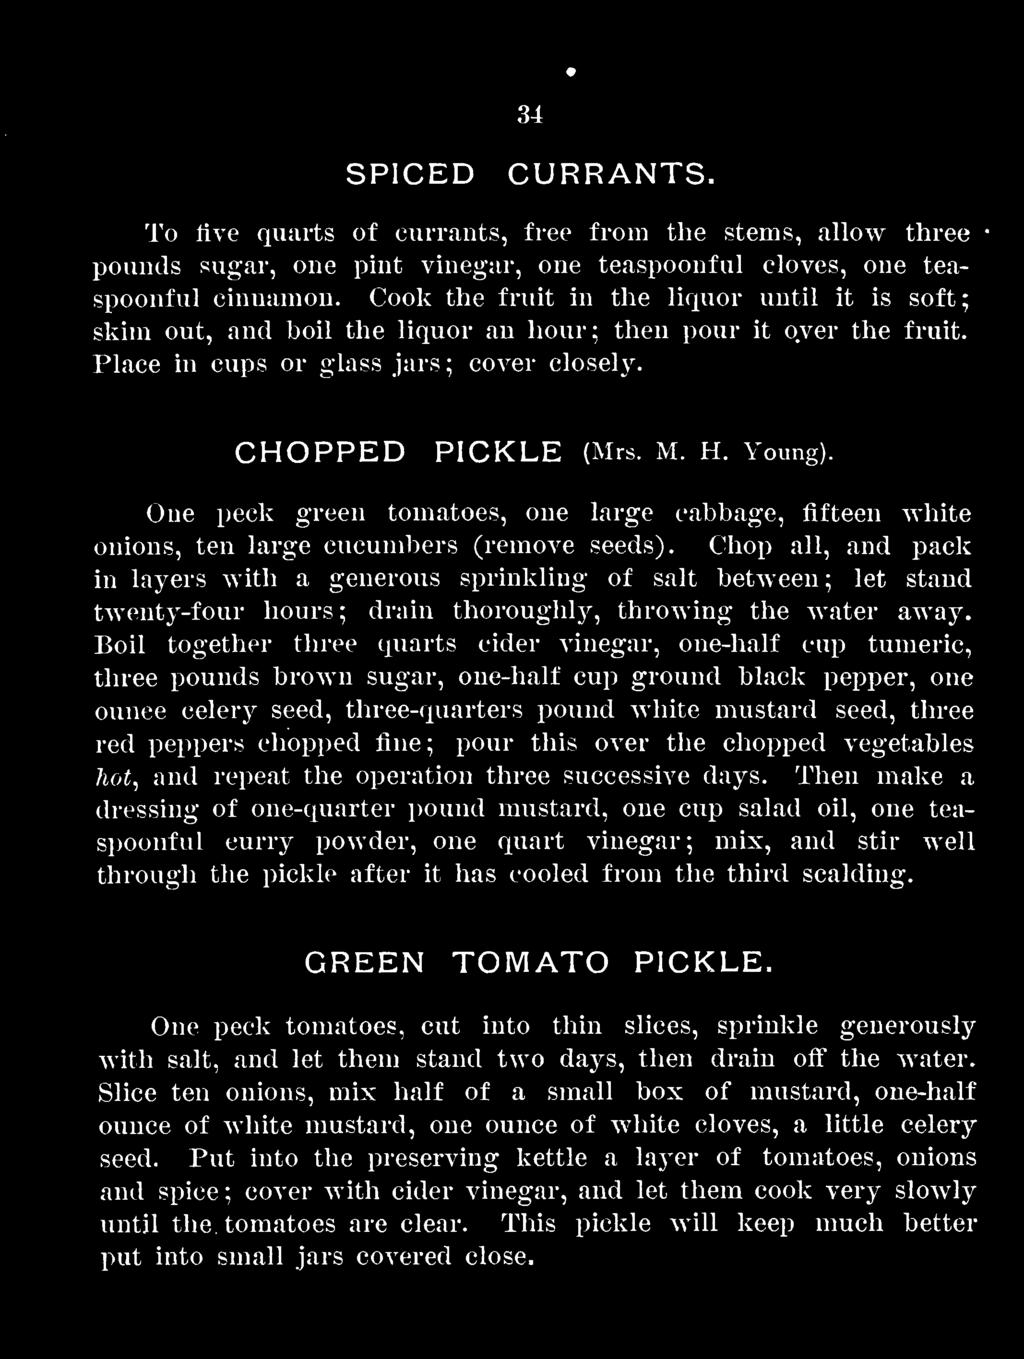 One peck green tomatoes, one large cabbage, fifteen white onions, ten large cucumbers (remove seeds).